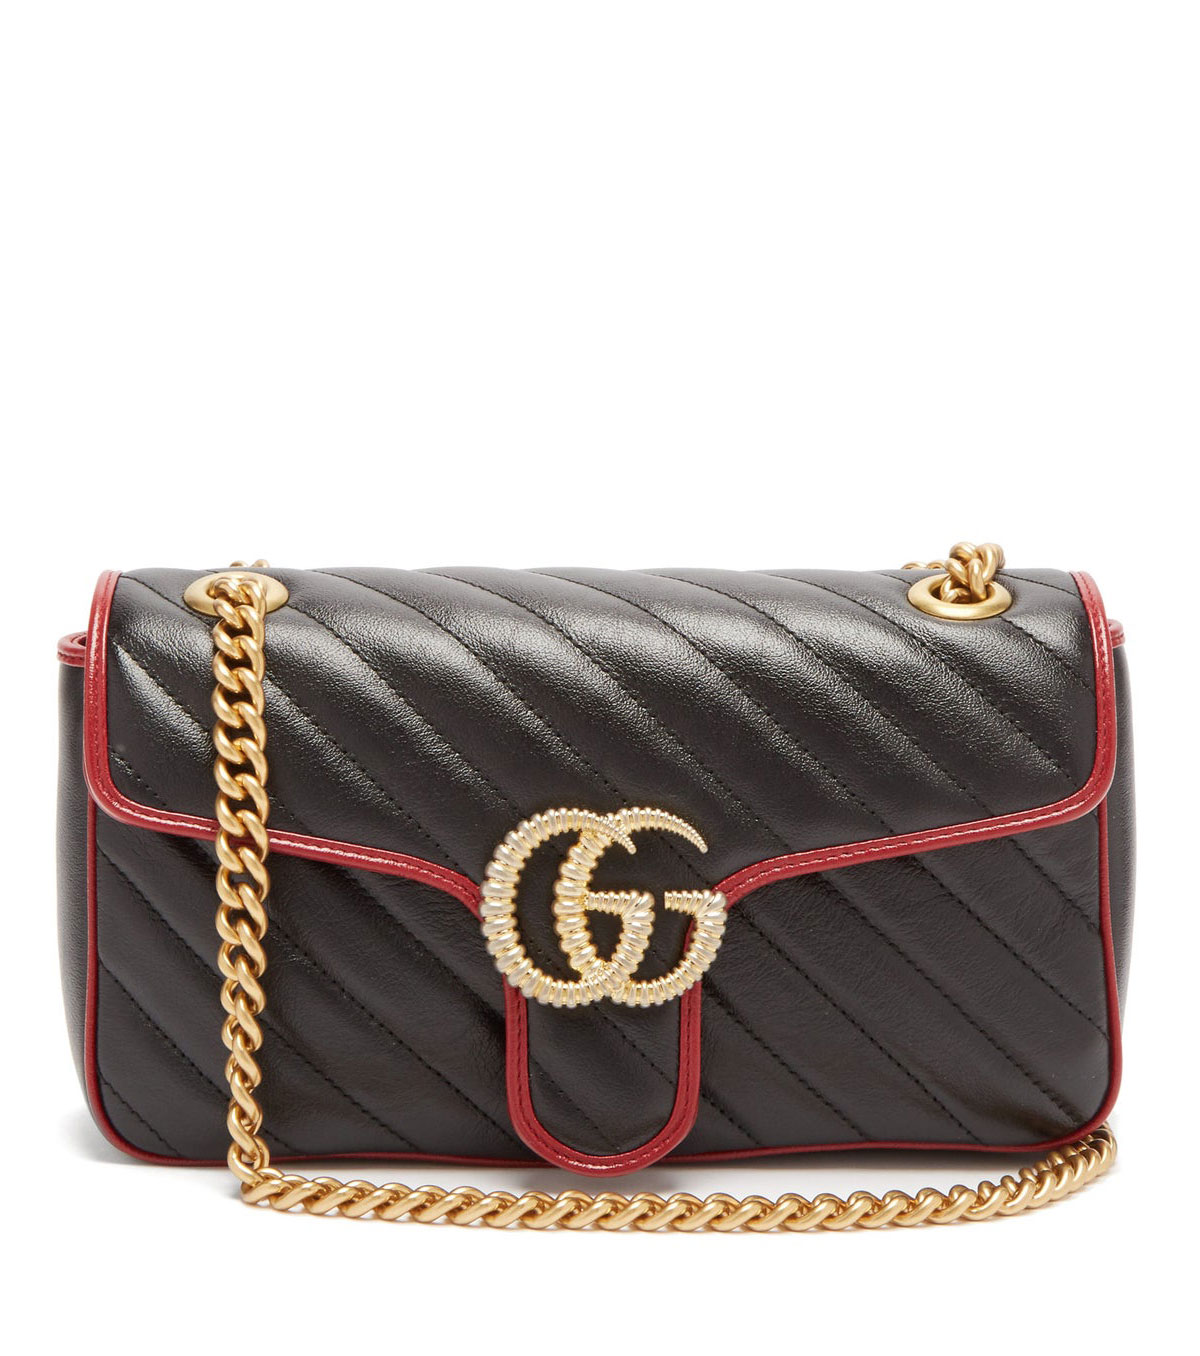 GG Marmont quilted leather 1286409